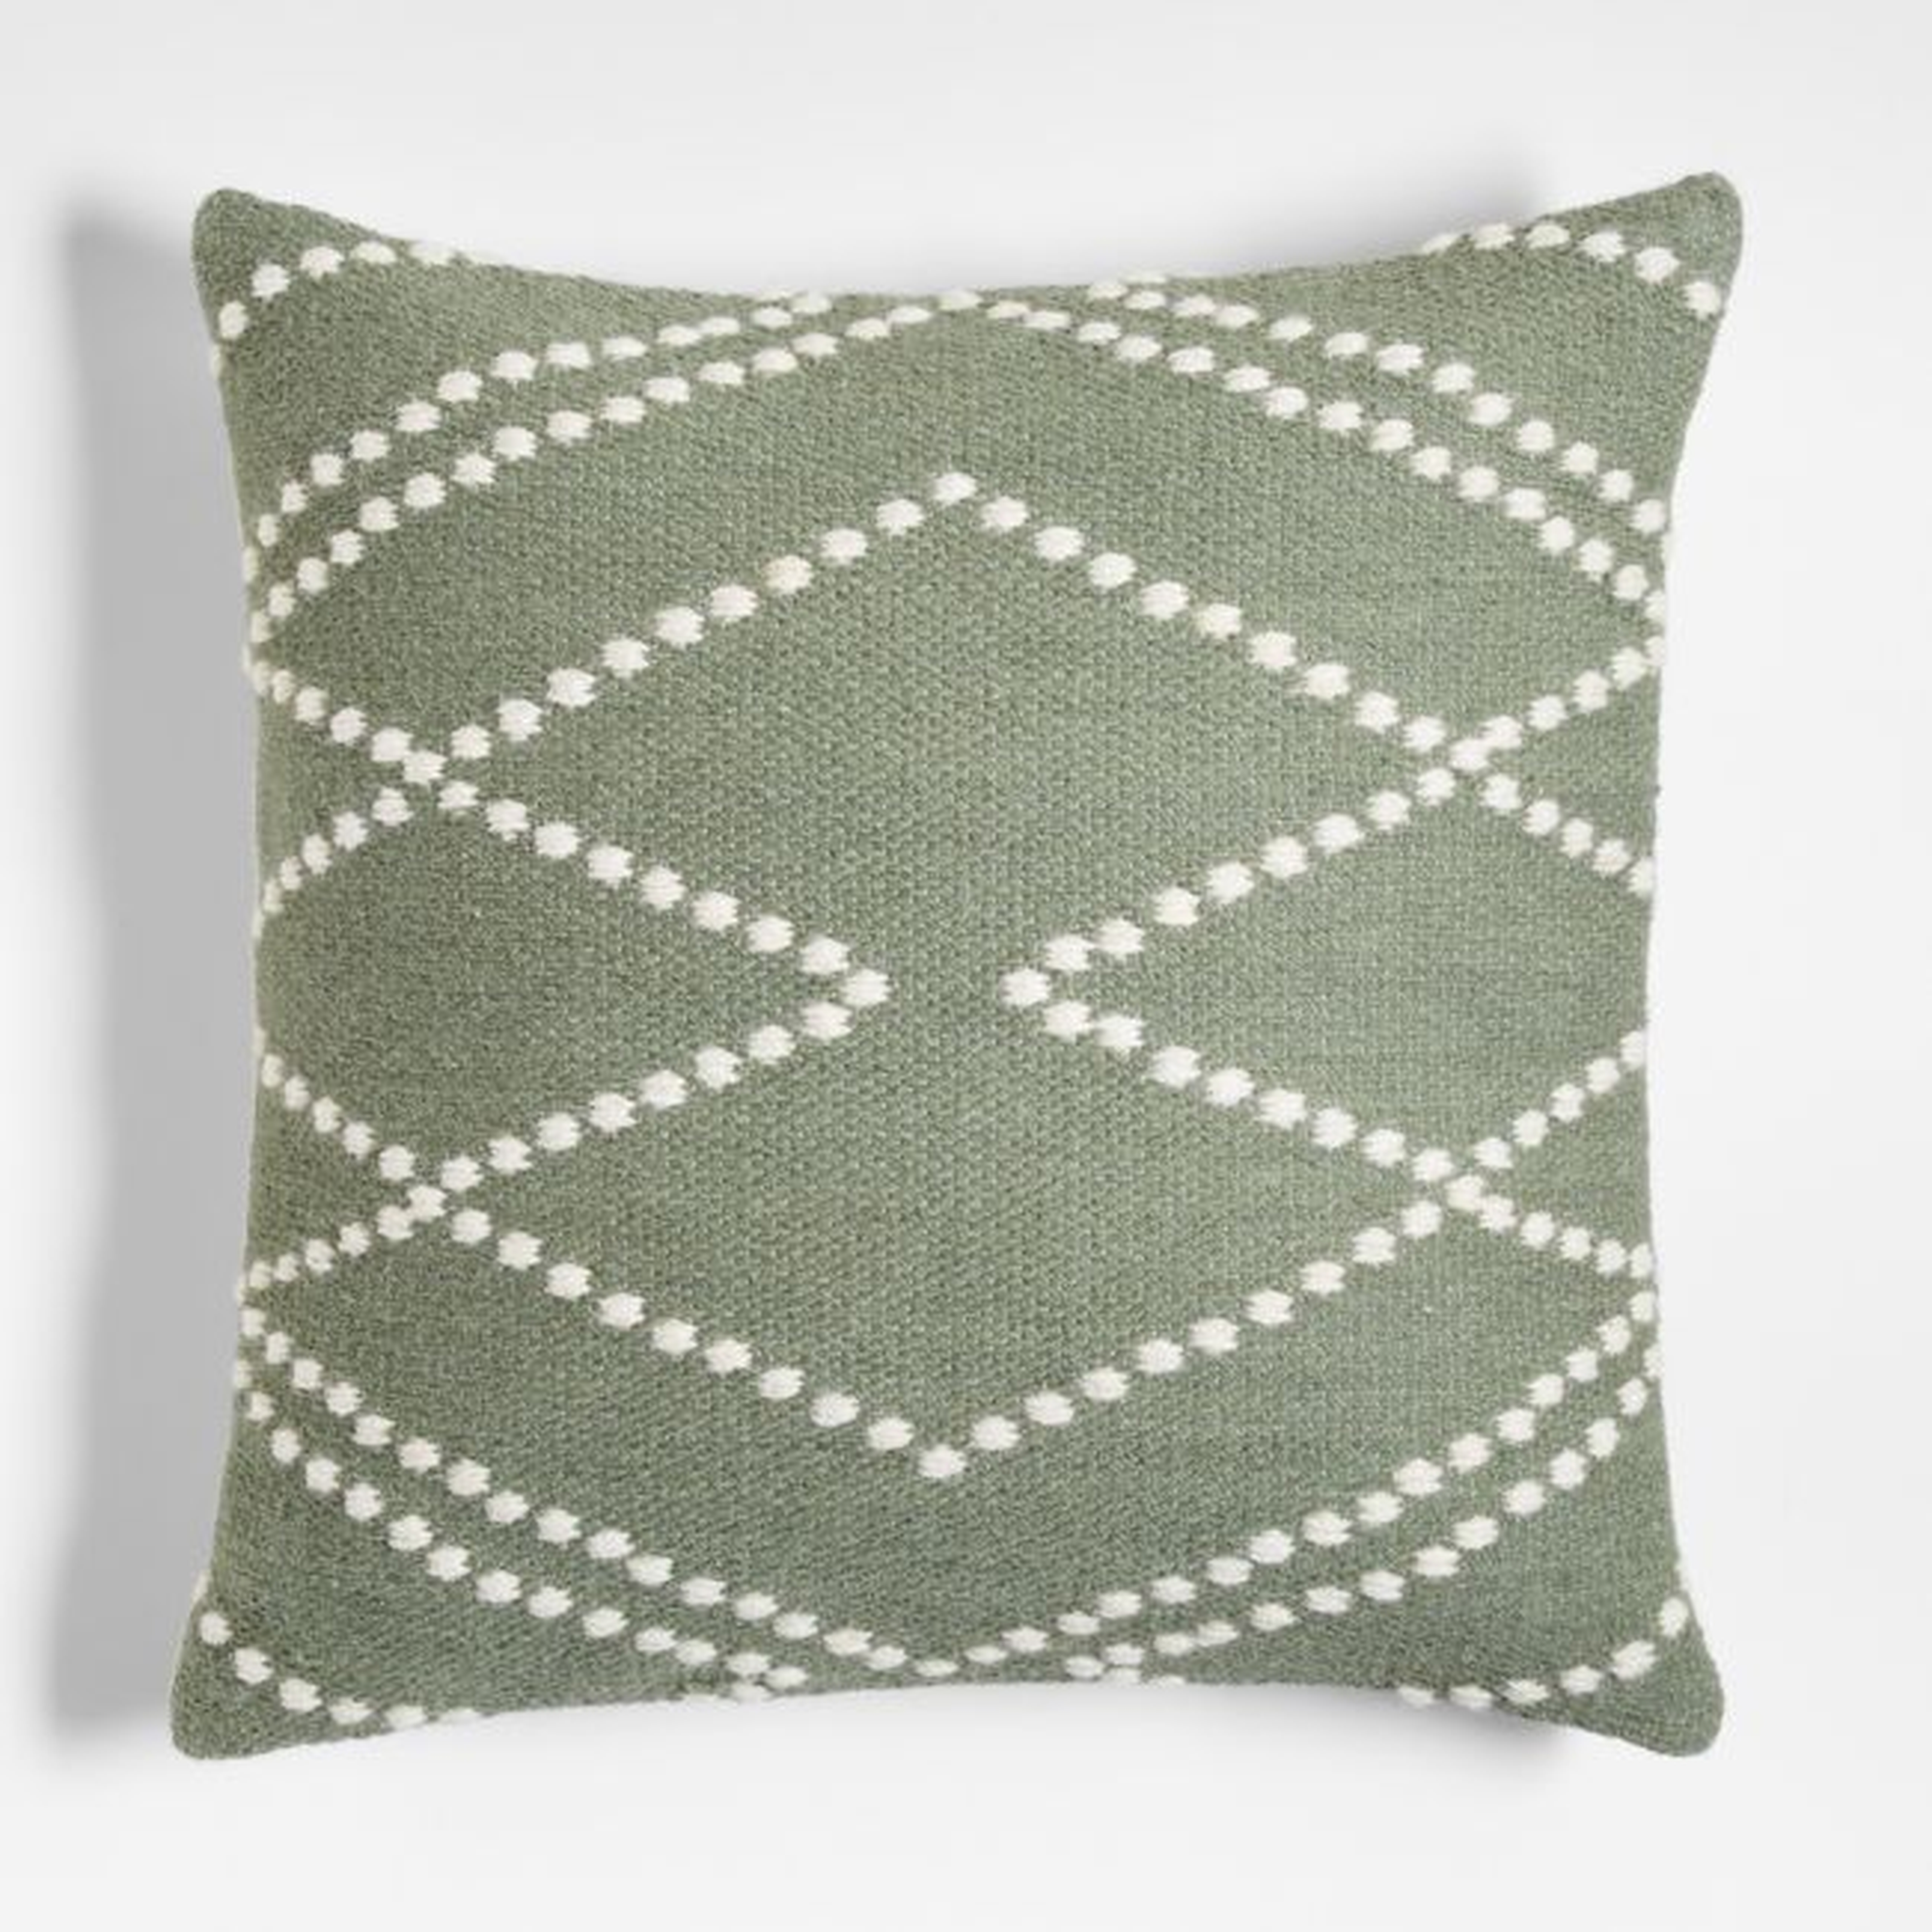 Byzan 23"x23" Sage Kilim Throw Pillow with Feather Insert - Crate and Barrel